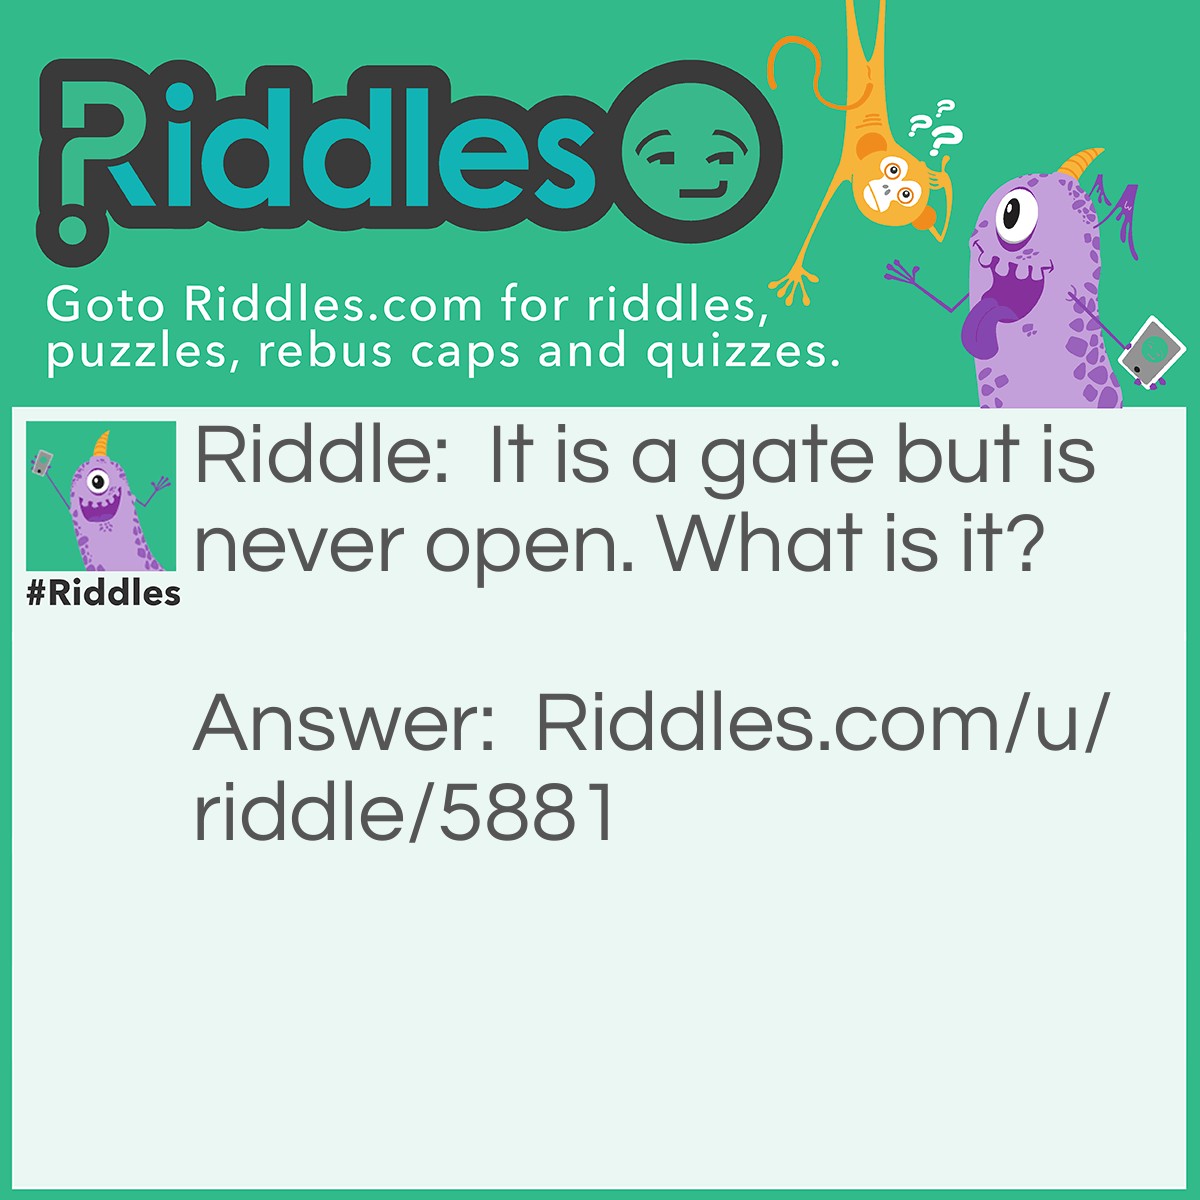 Riddle: It is a gate but is never open. What is it? Answer: Colgate.